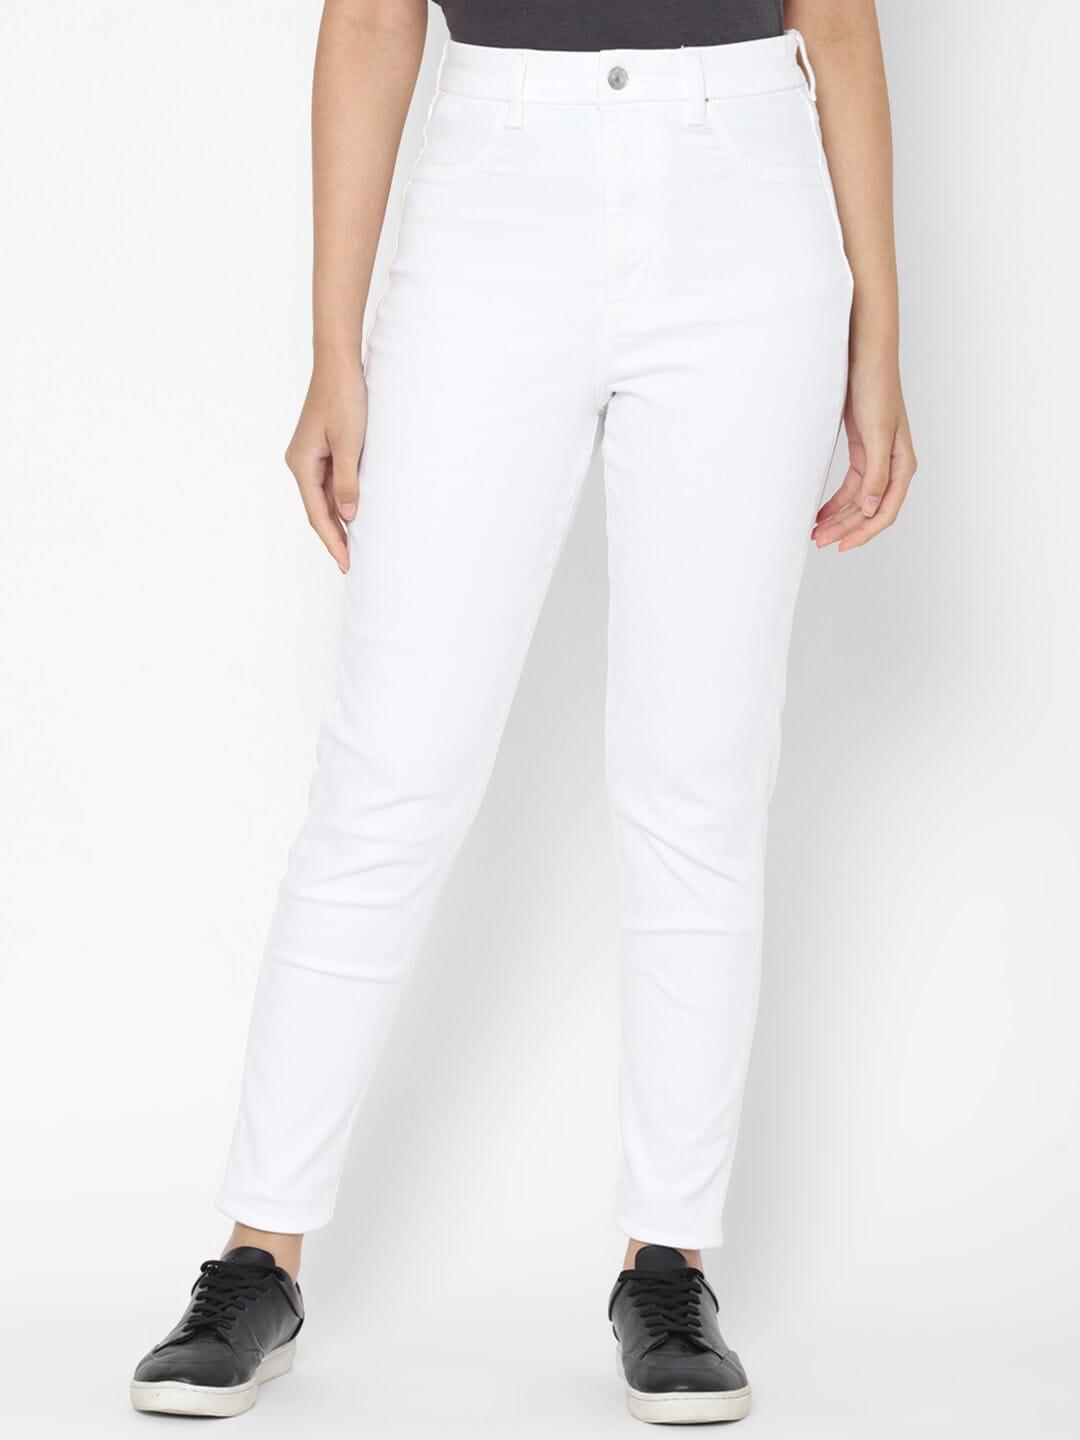 american-eagle-outfitters-women-white-slim-fit-denim